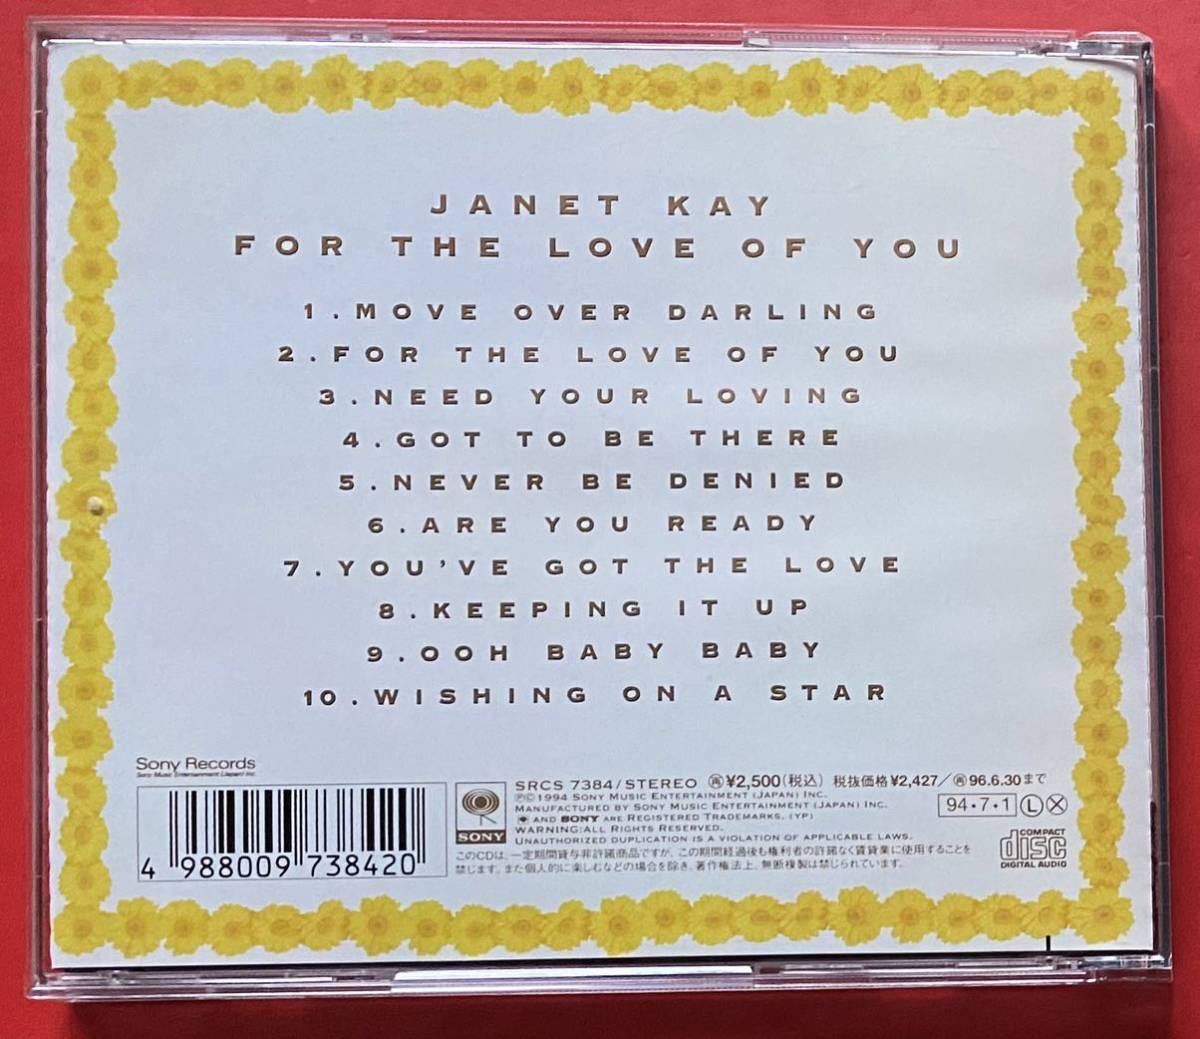 【CD】ジャネット・ケイ「For The Love Of You」 Janet Kay 国内盤 [07180030]_画像2